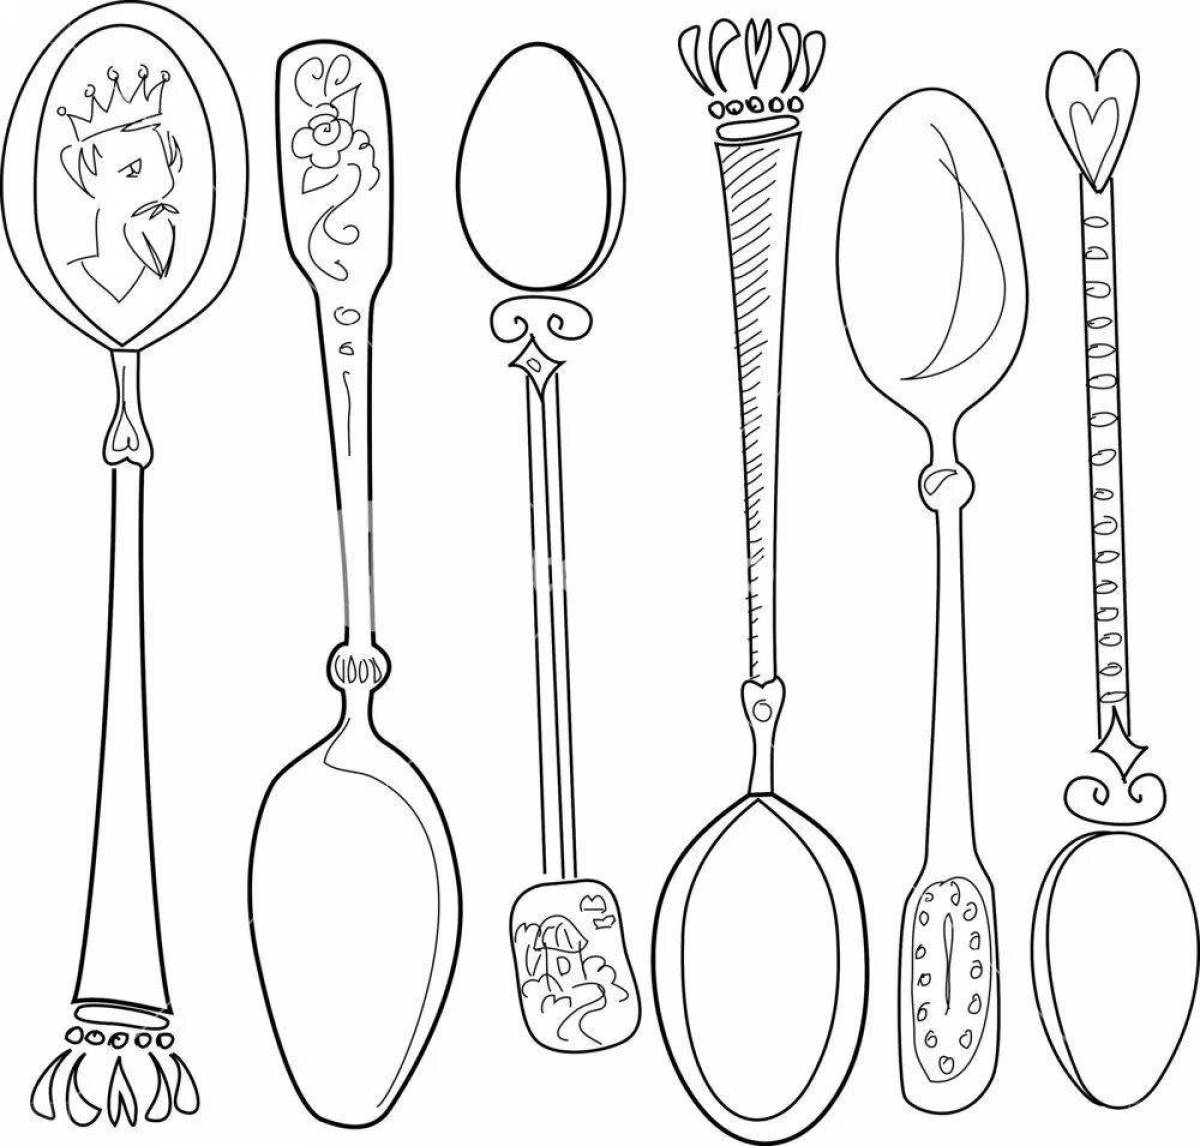 Playful wooden spoon coloring page for kids